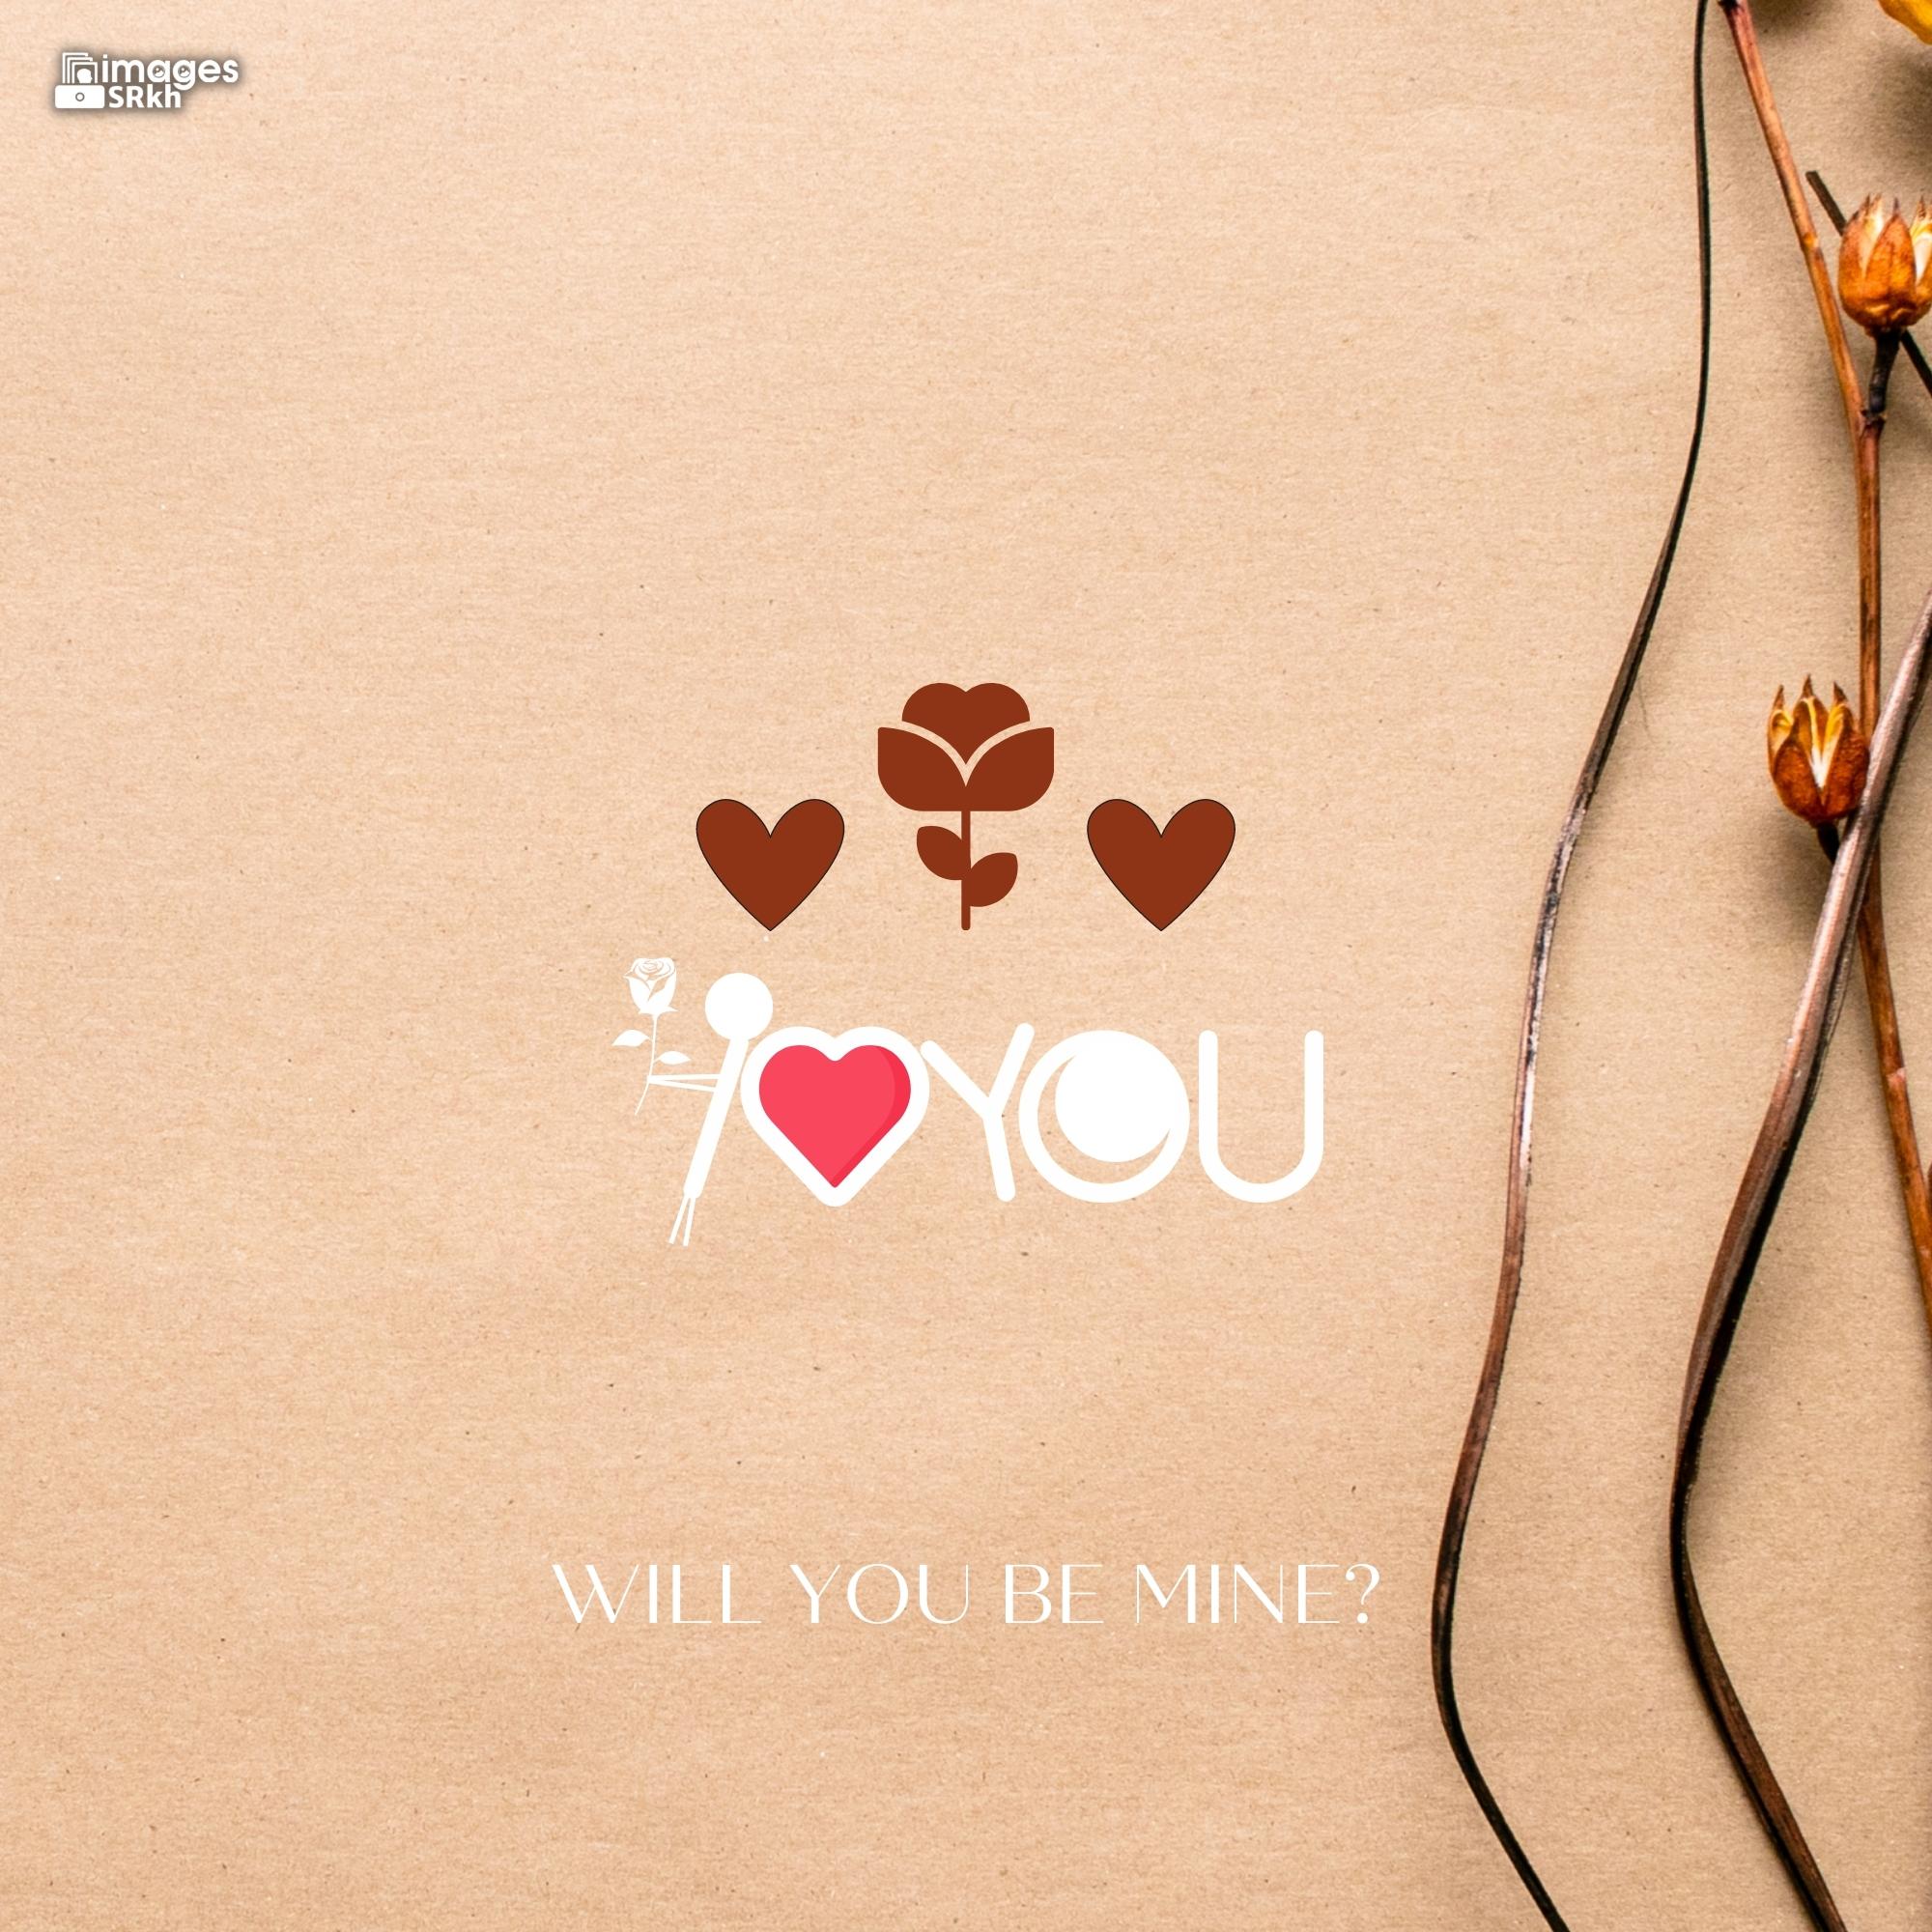 Happy Propose Day Images | 369 | I LOVE YOU